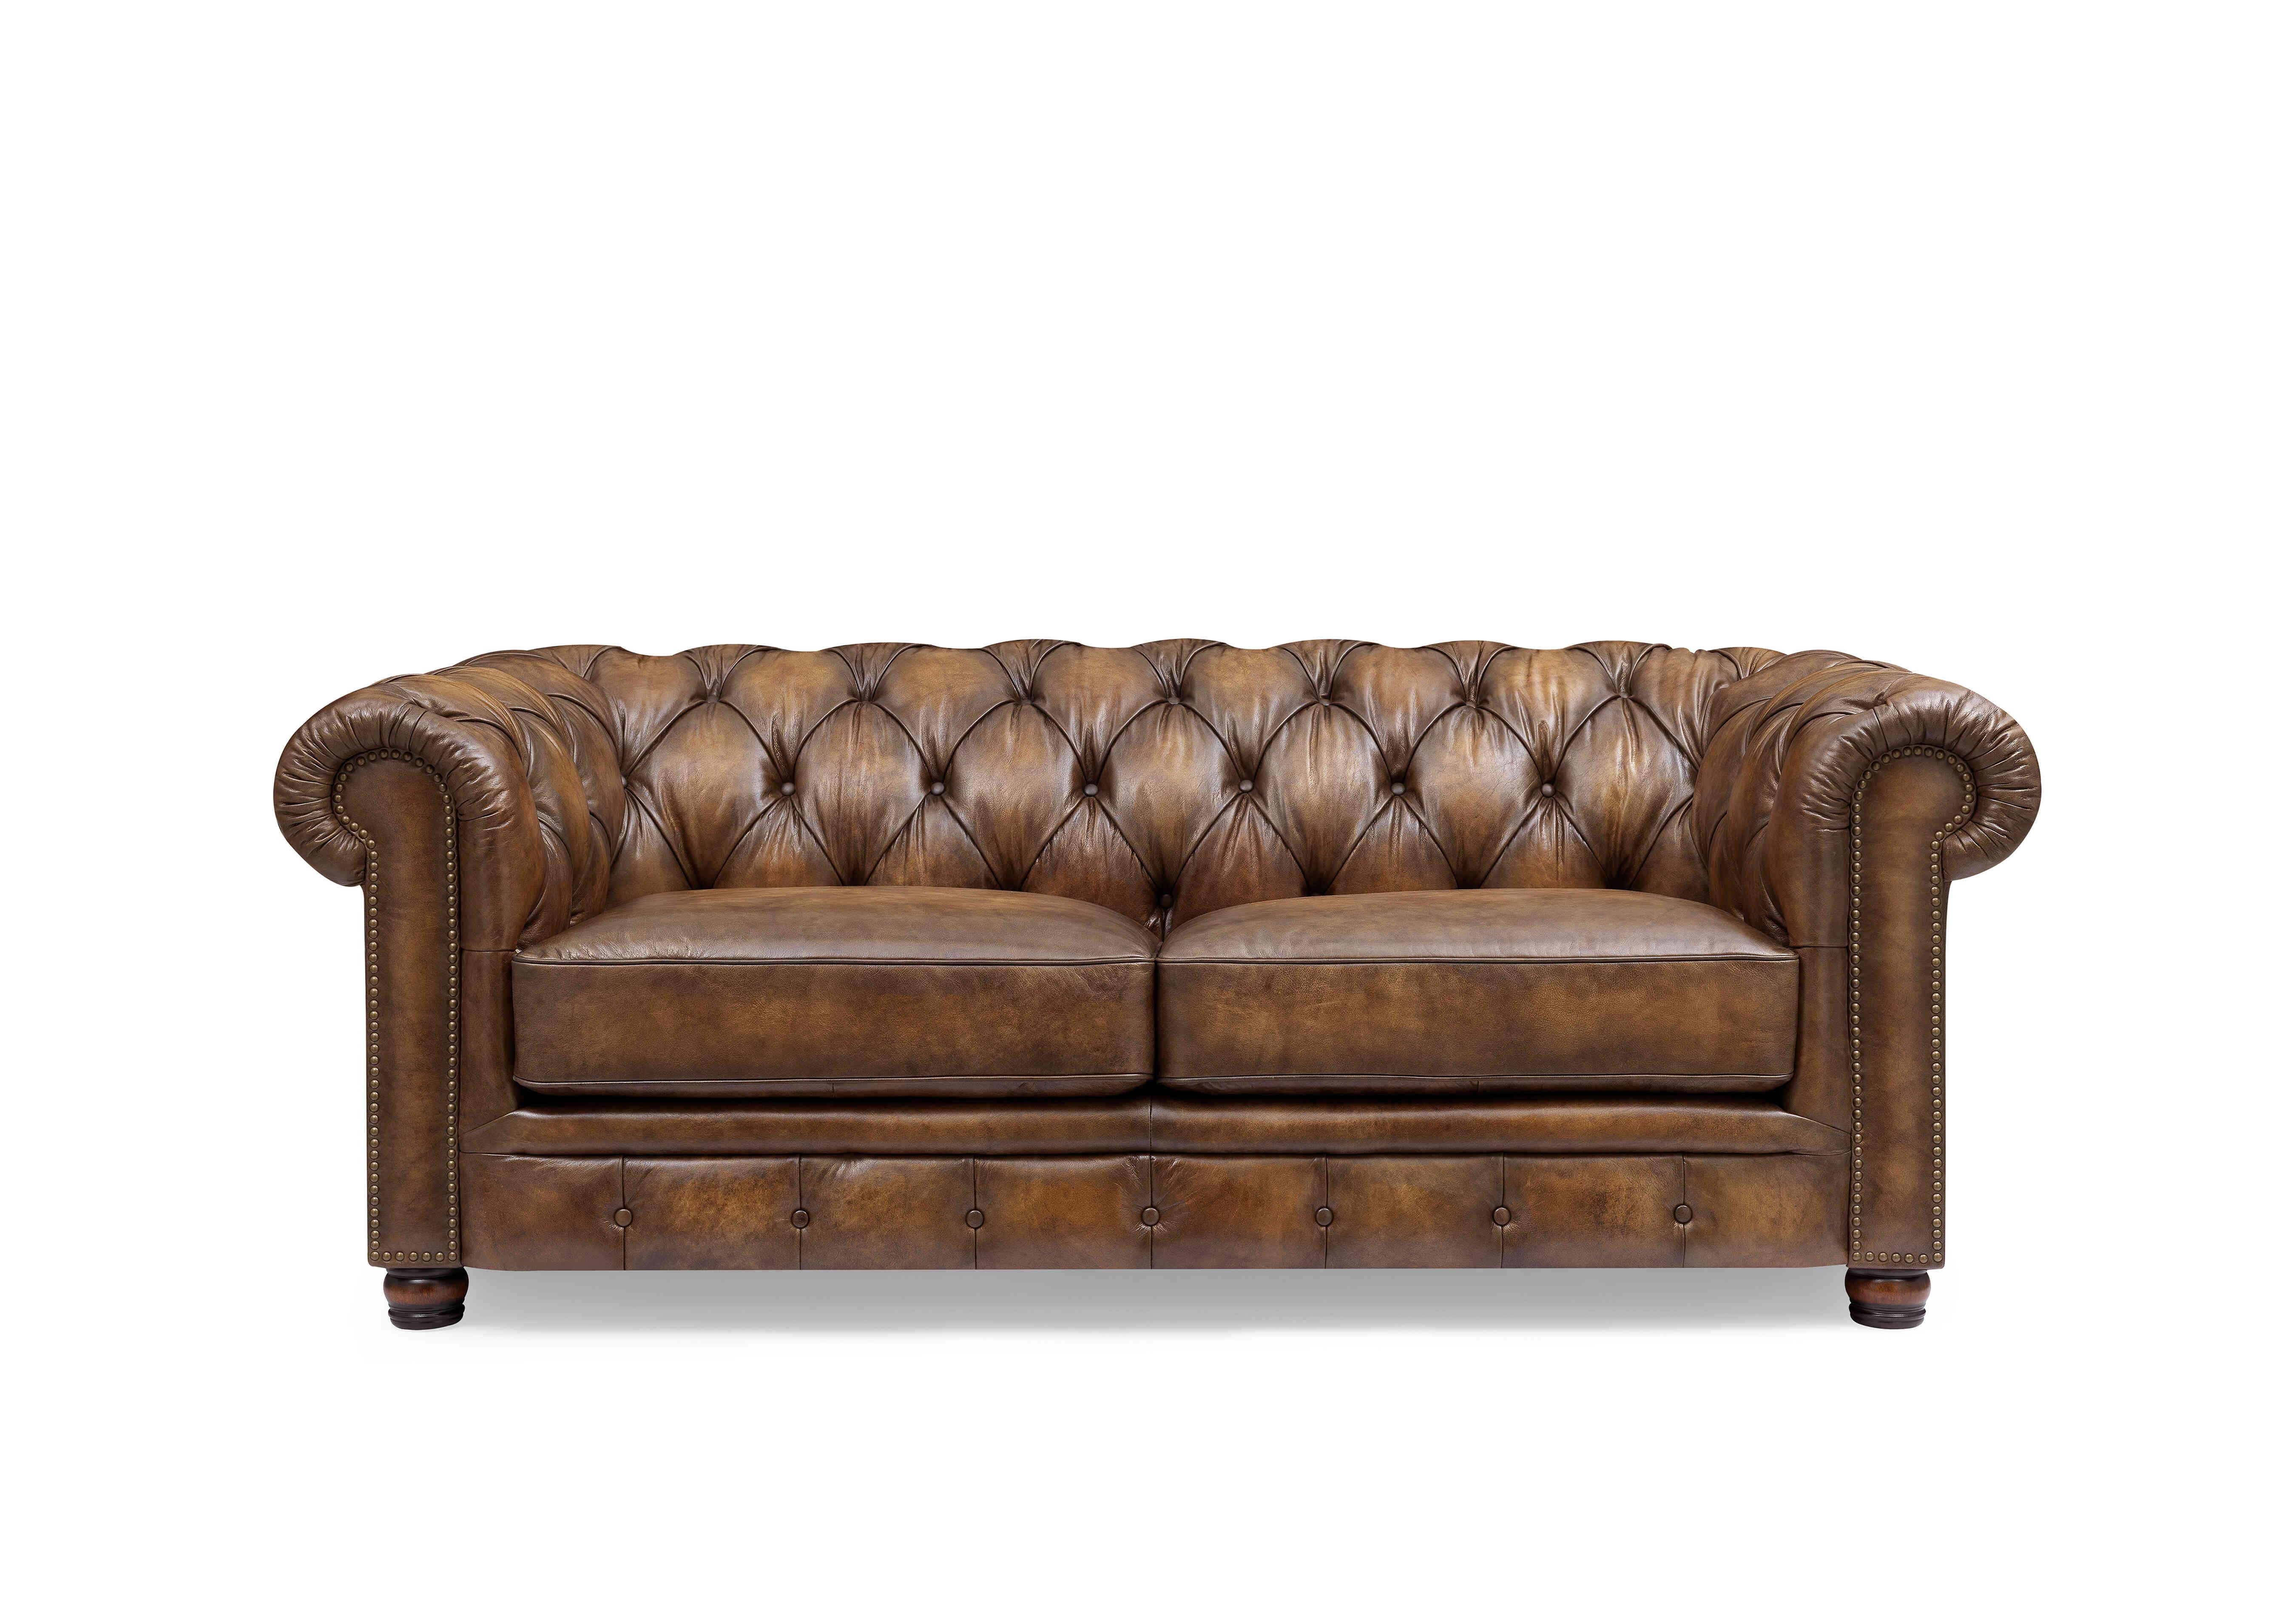 Shackleton 3 Seater Leather Chesterfield Sofa in X3y1-1981ls Saddle on Furniture Village